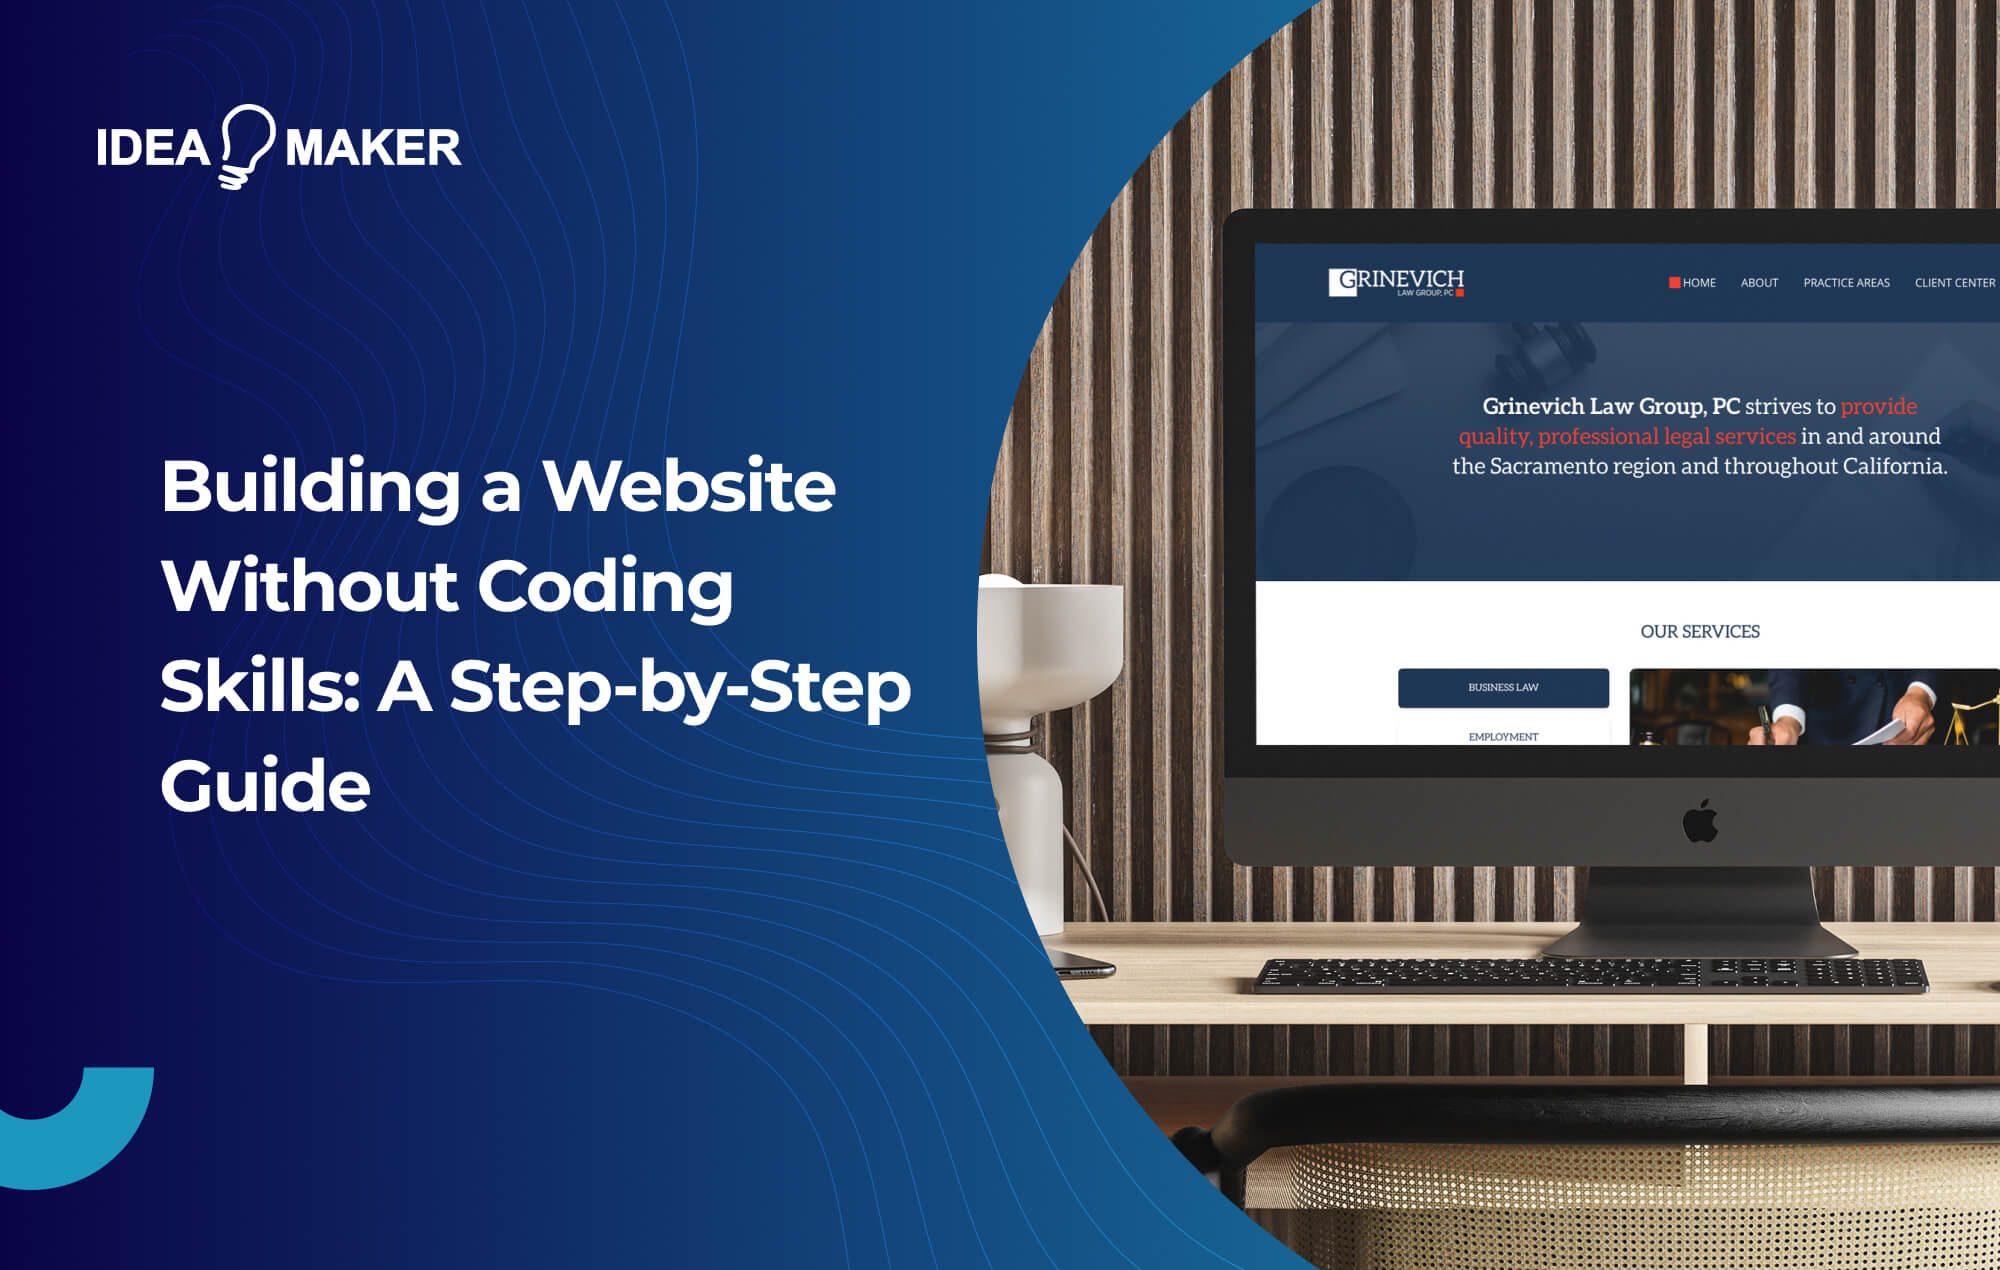 Building a Website Without Coding Skills: A Step-by-Step Guide